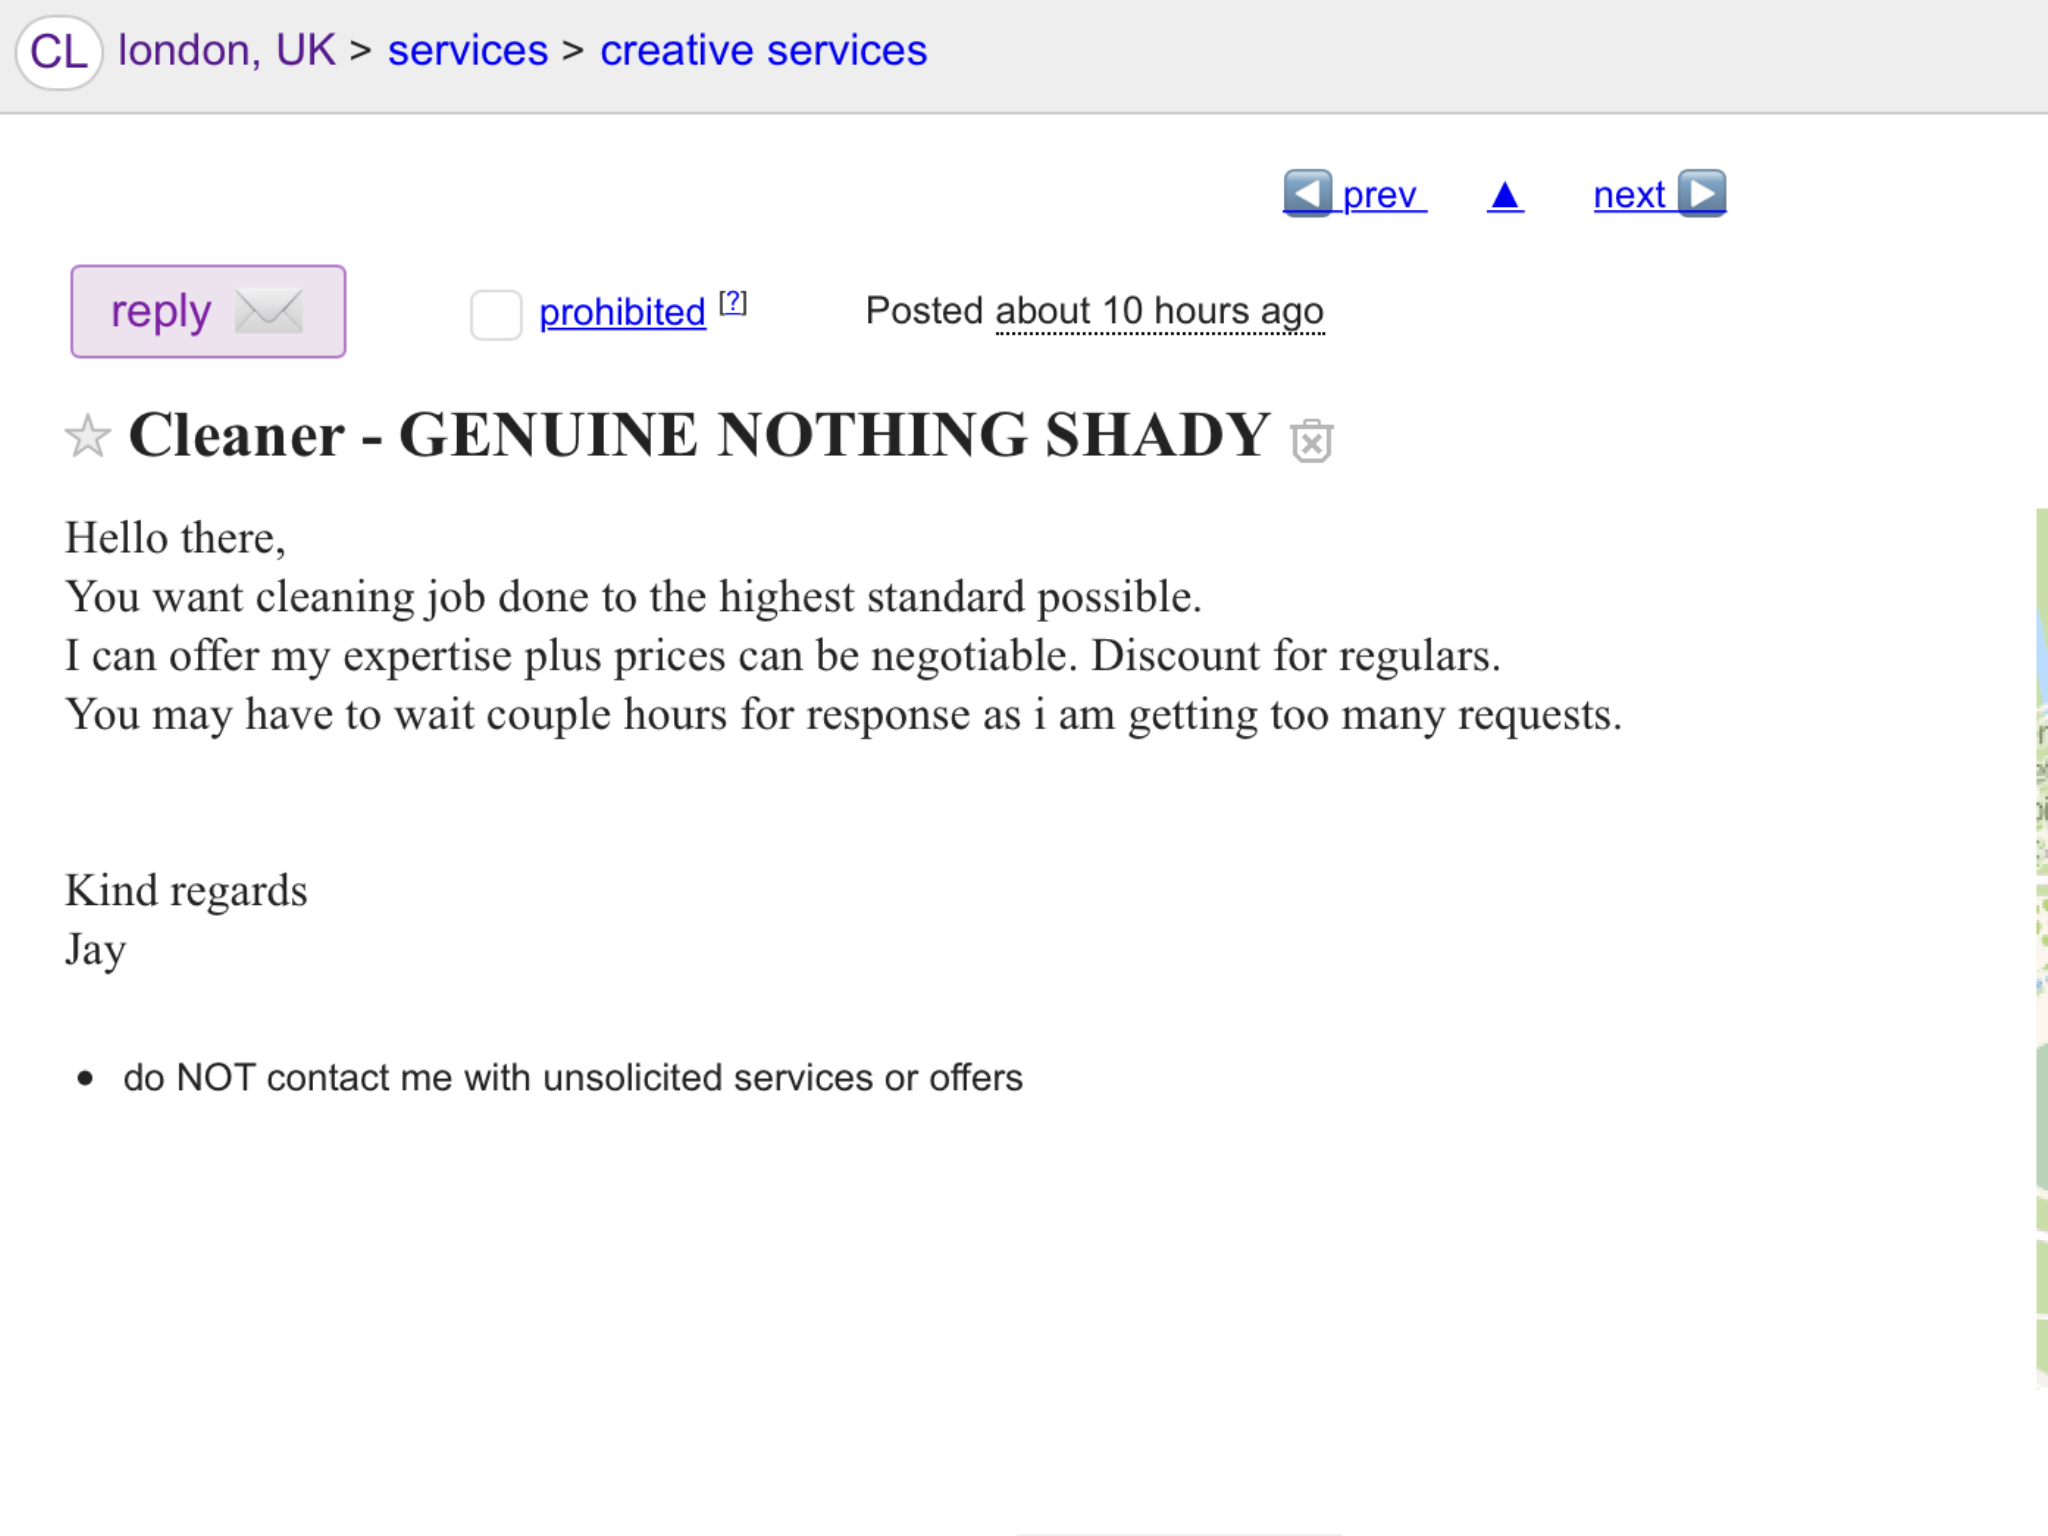 craigslist ad on document - Cl london, Uk > services > creative services prev A next D v prohibited 2 Posted about 10 hours ago ea Cleaner Genuine Nothing Shady Hello there, You want cleaning job done to the highest standard possible. I can offer my exper